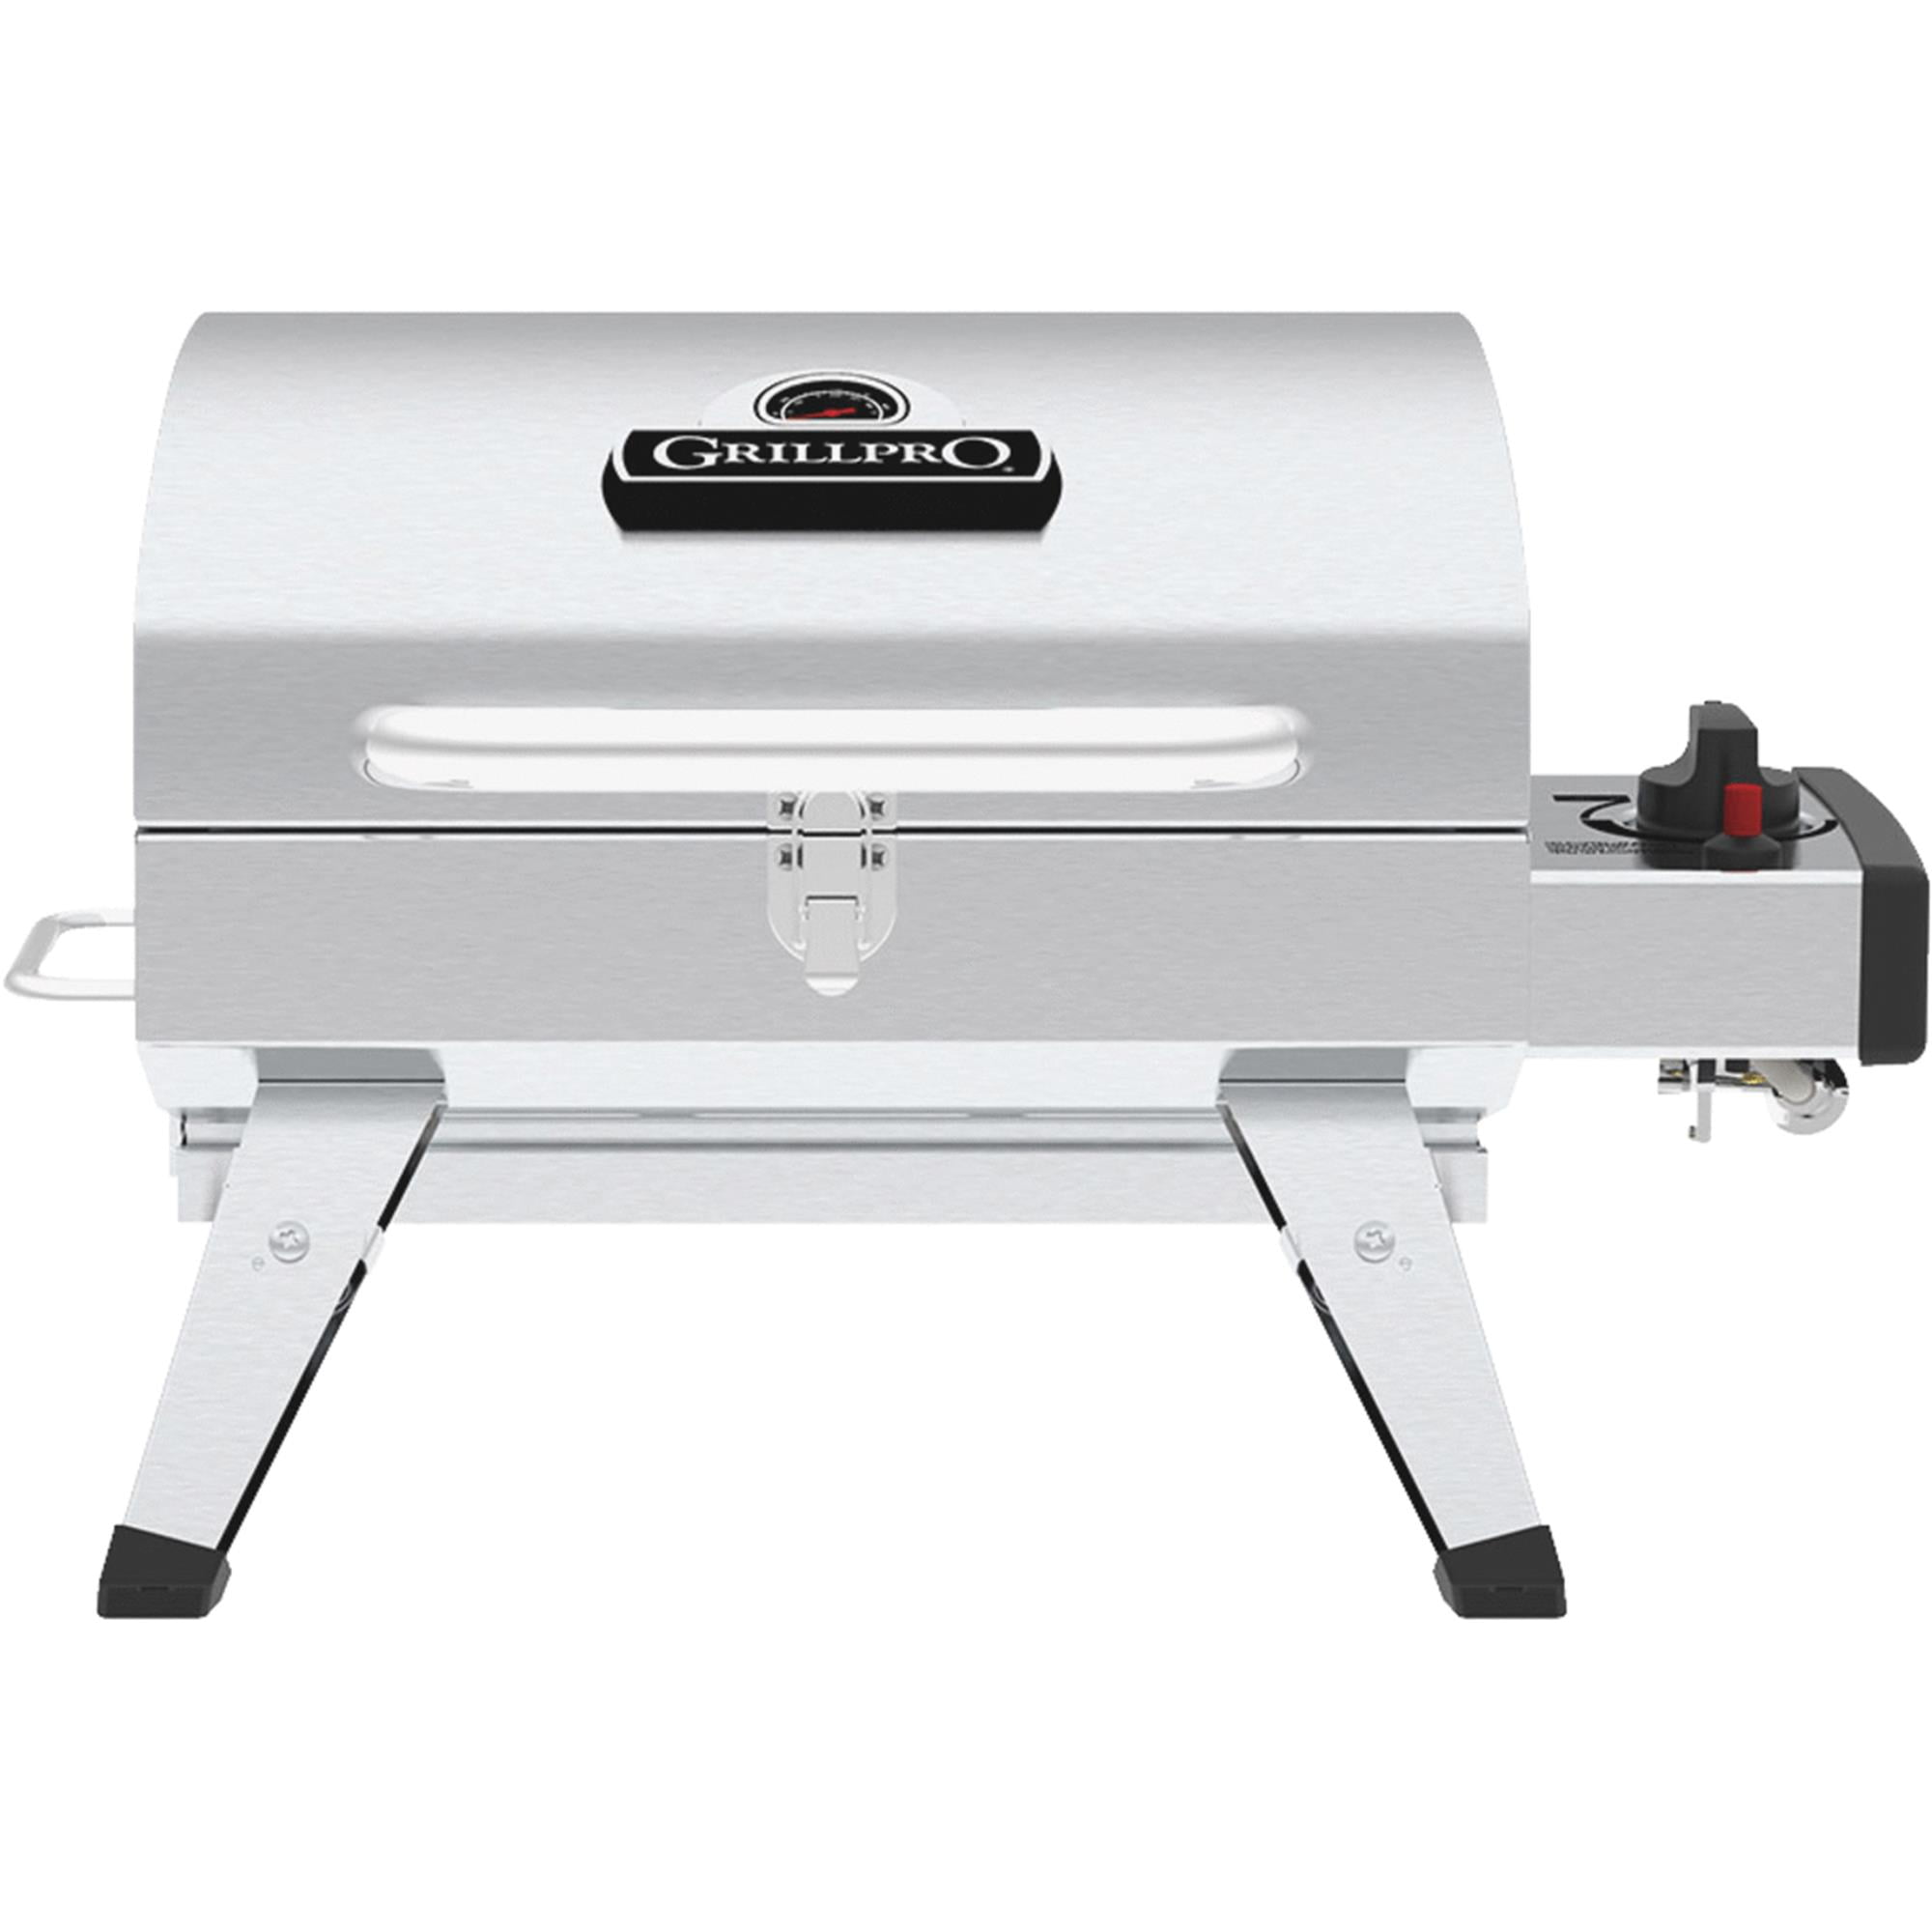 Commercial Chef Pizza Oven Outdoor - Propane GAS Portable for Outside